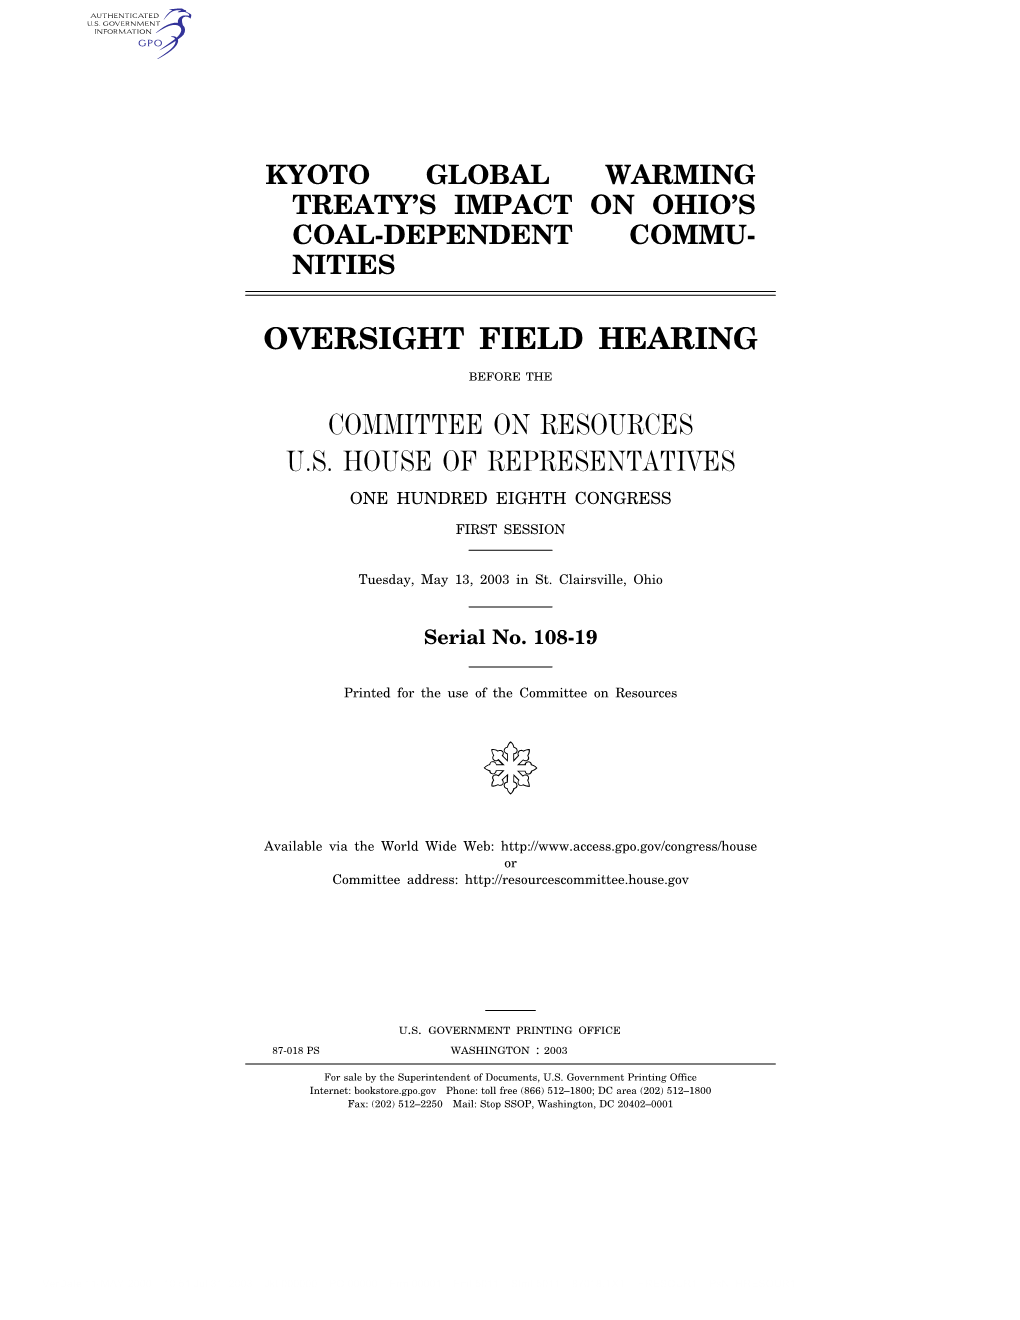 Oversight Field Hearing Committee on Resources